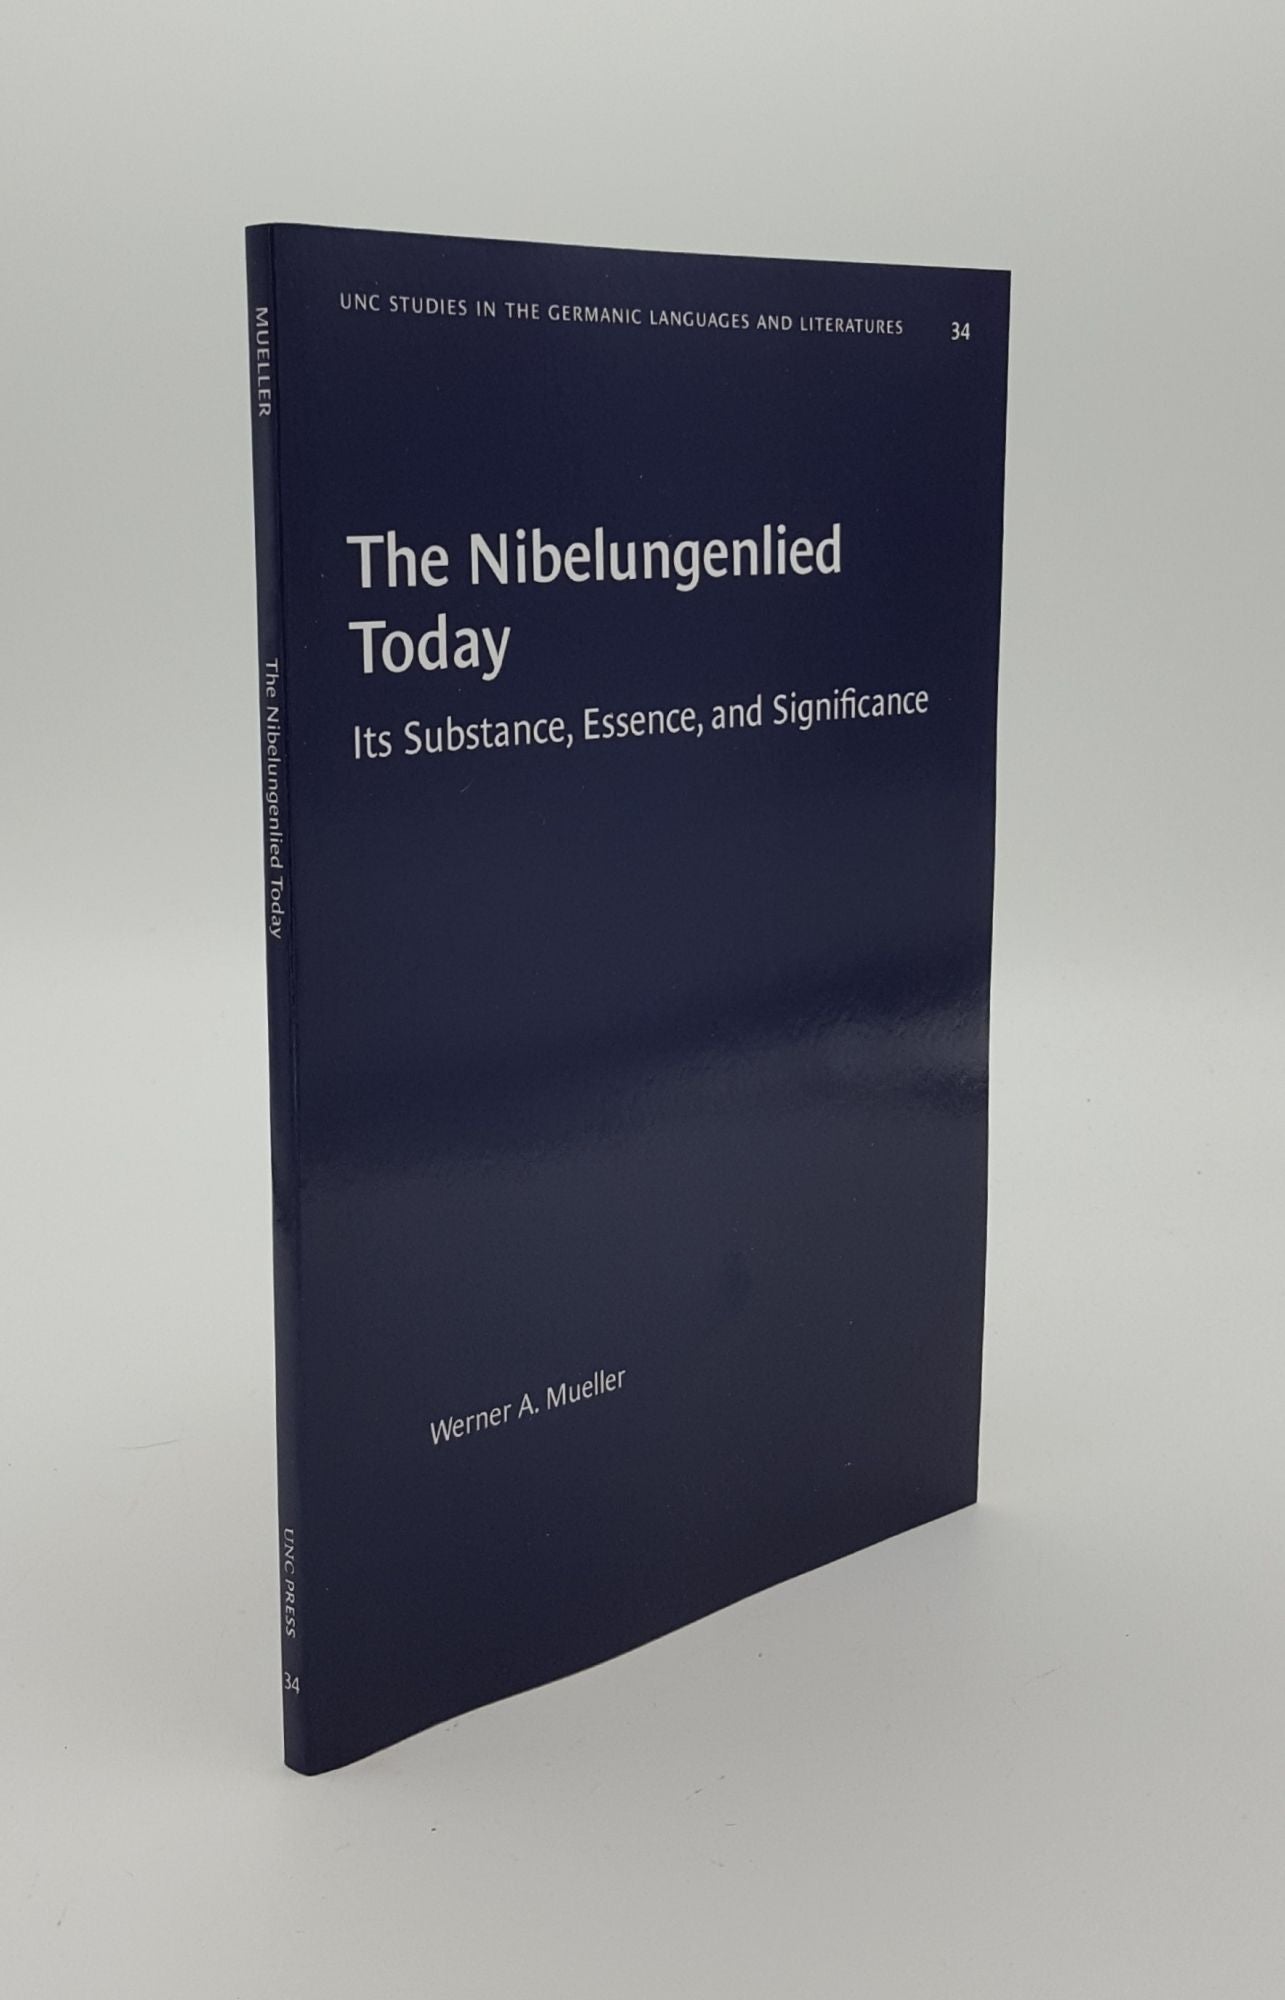 MUELLER Werner A. - The Nibelungenlied Today Its Substance, Essence, and Significance (University of North Carolina Studies in Germanic Languages and Literature)